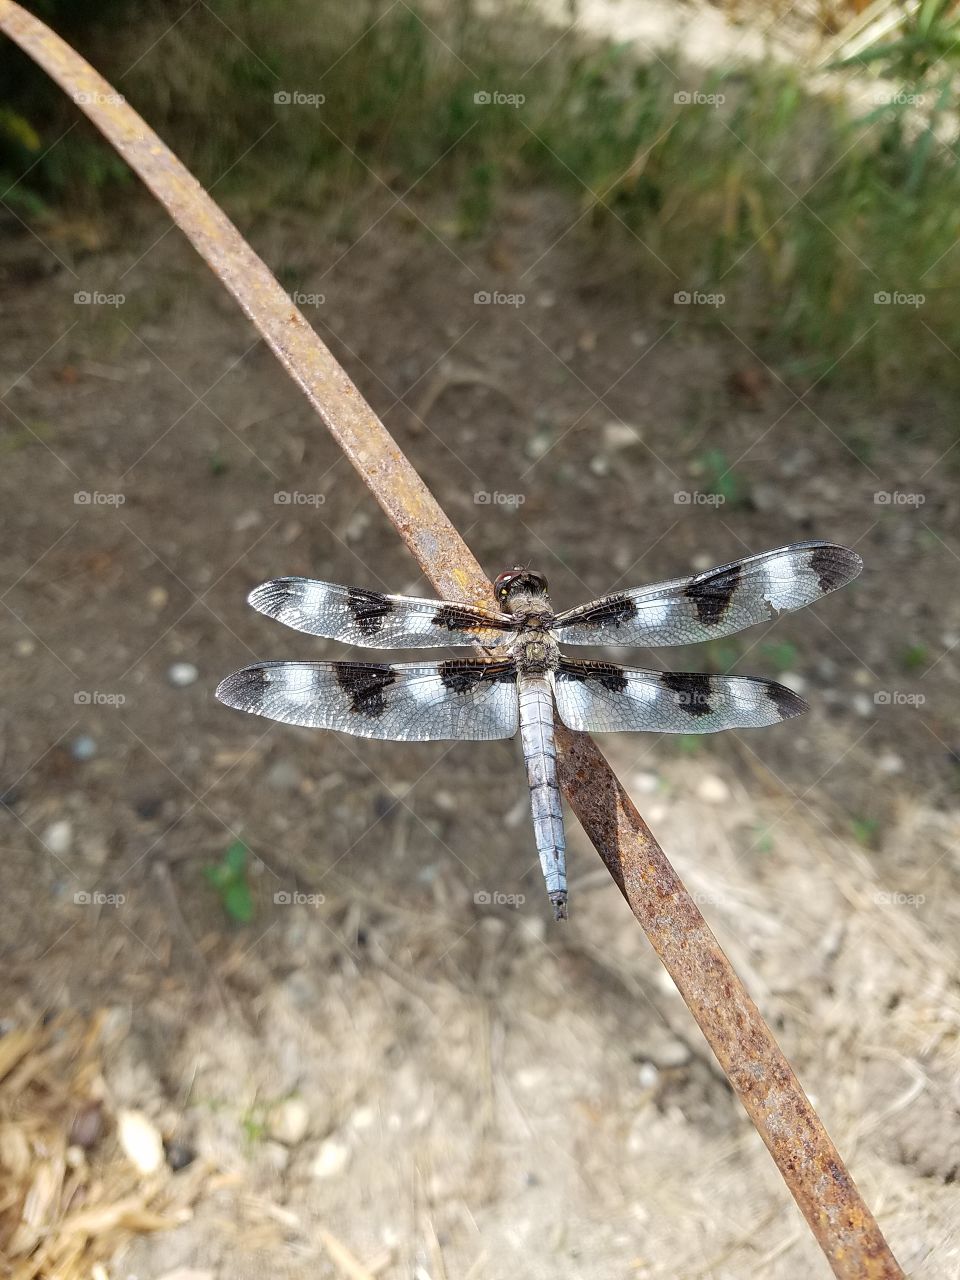 Dragonfly from Illinois.